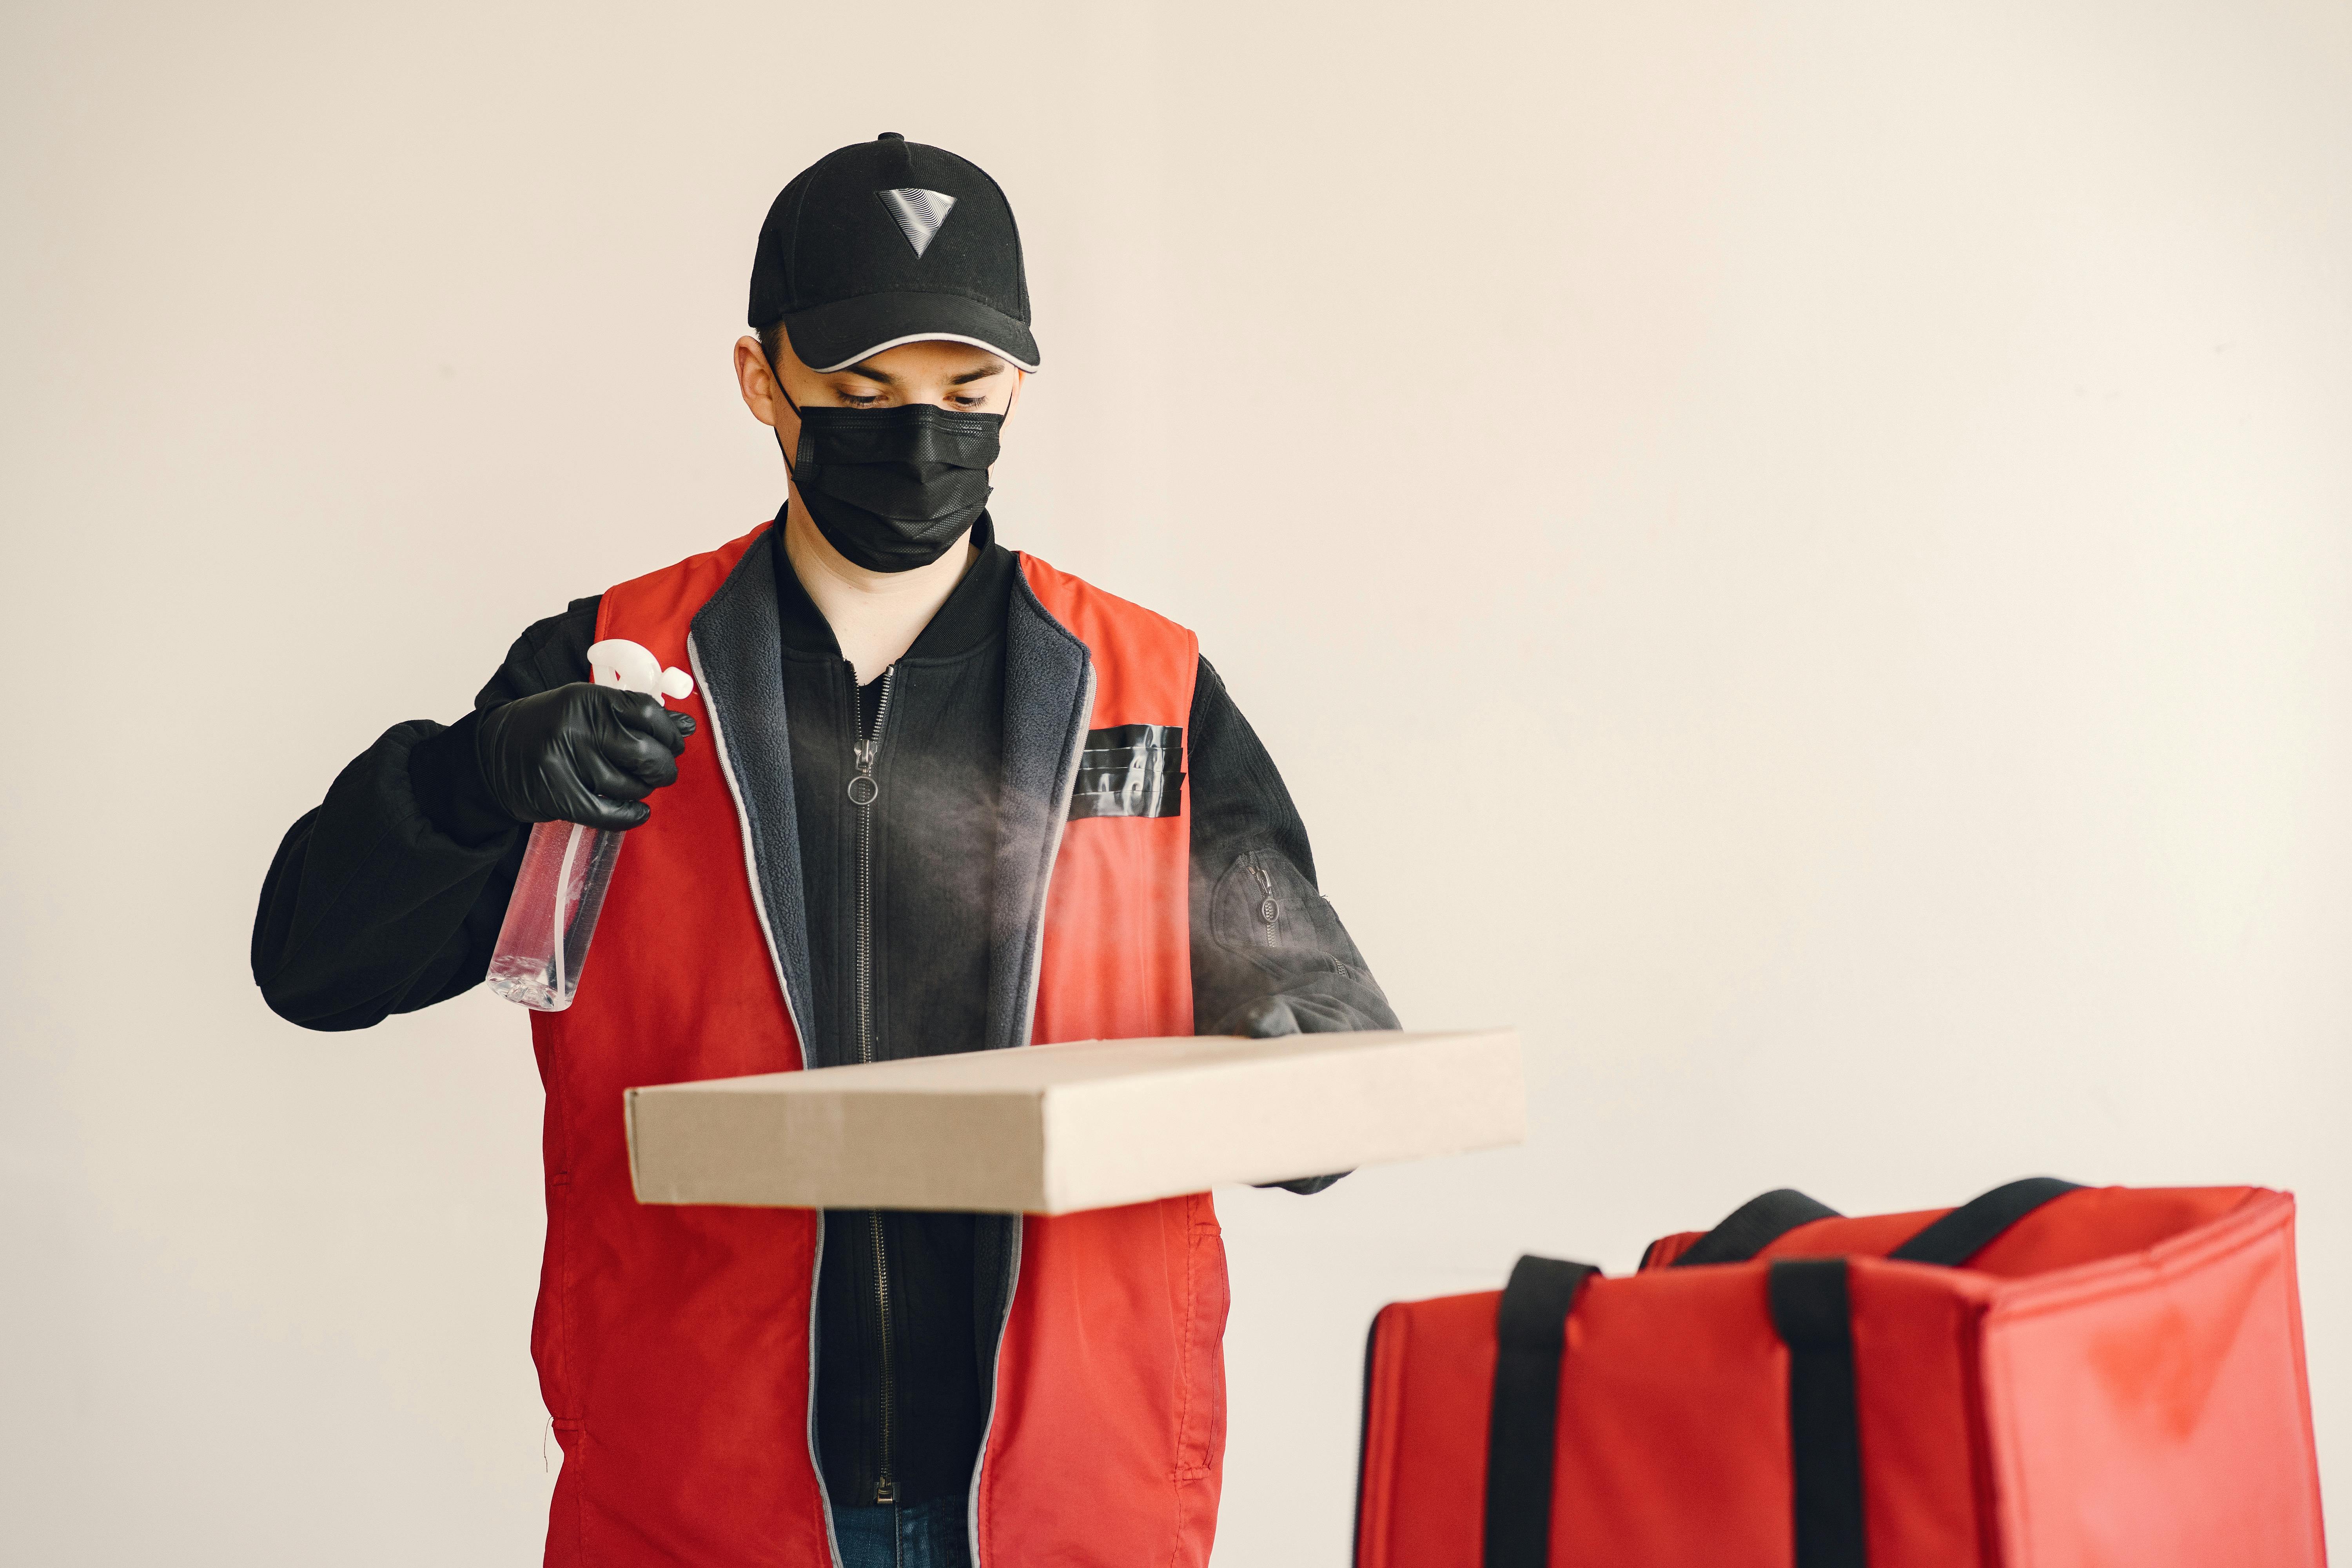 young delivery man disinfecting pizza box during coronavirus pandemic